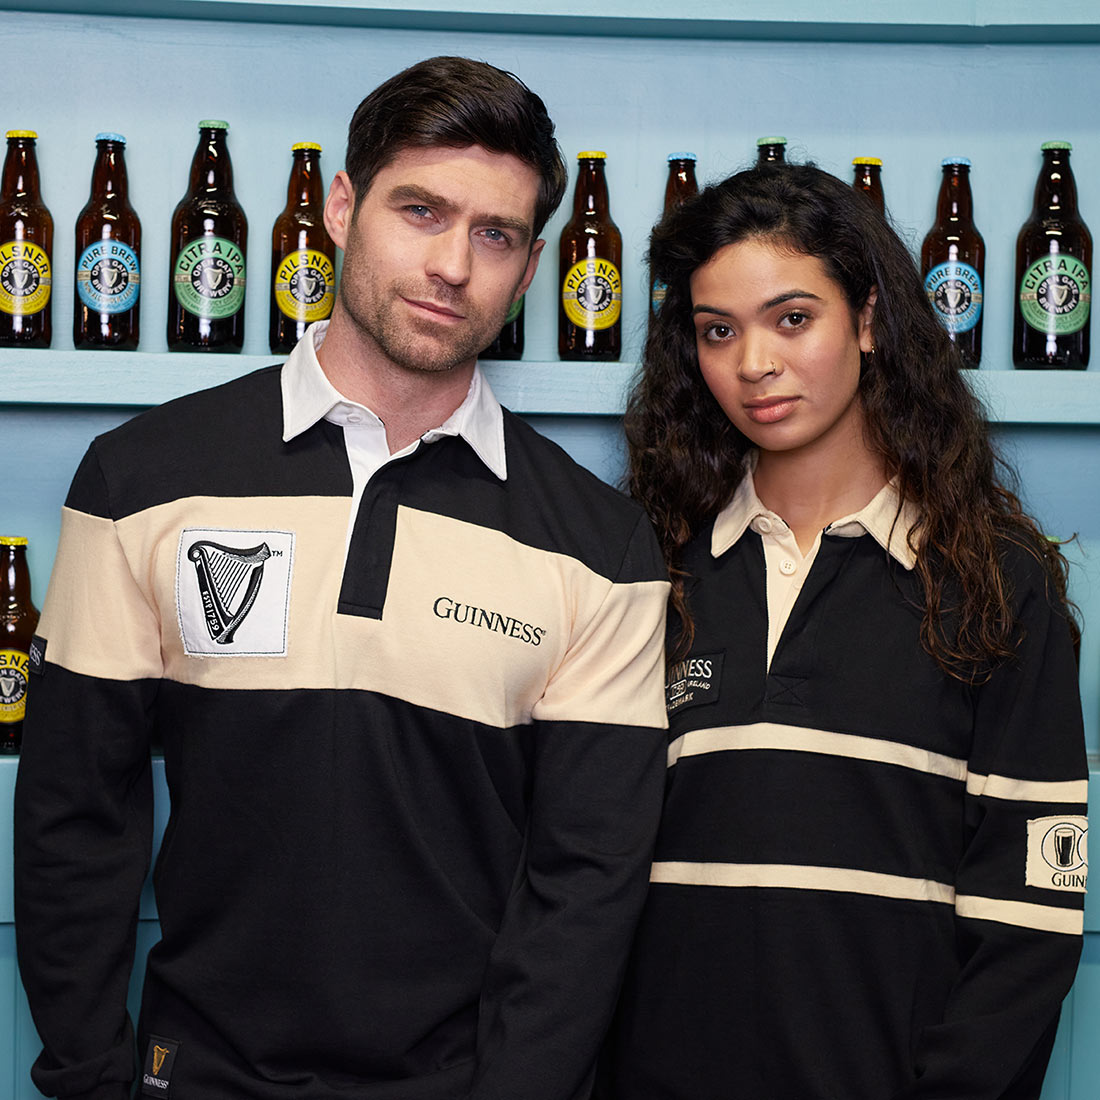 Description: A man and woman dressed in authentic Guinness Traditional Rugby Jerseys, made of cotton jersey fabric, portraying an authentic rugby look.